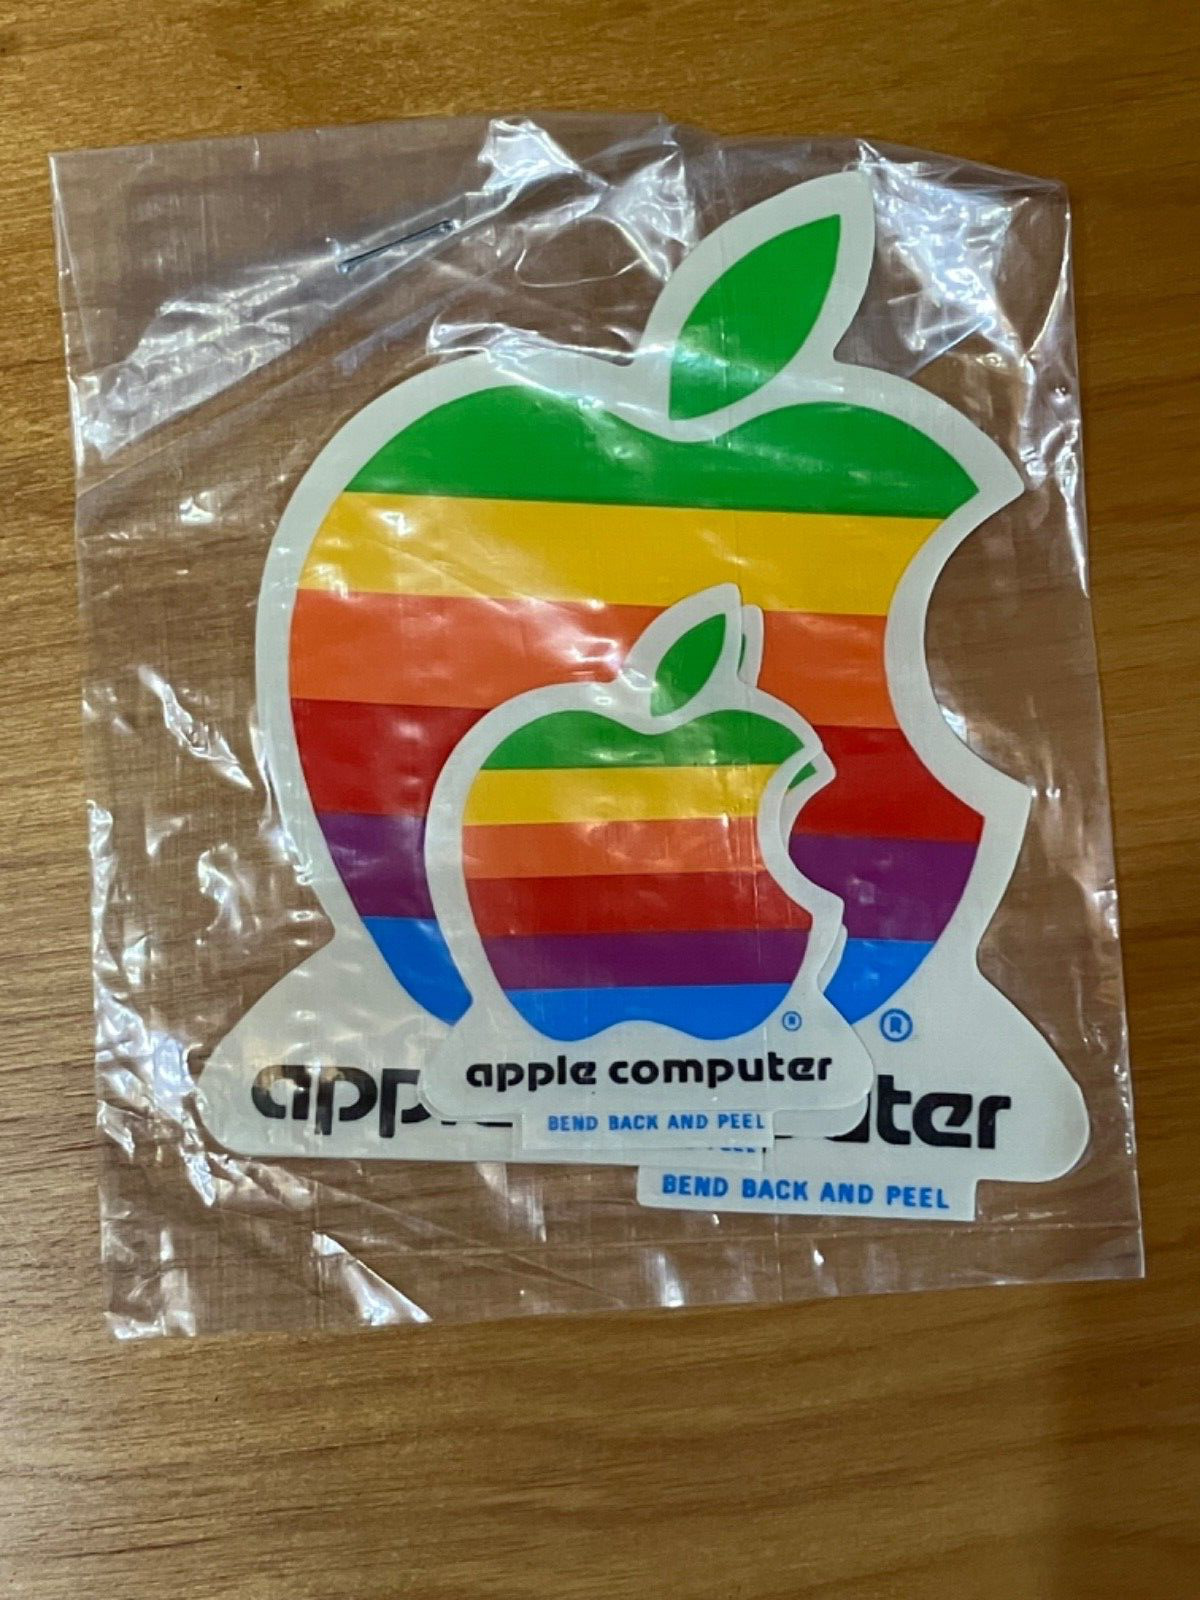 Apple Computer Logo Stickers - Unopened Package of 3, Vintage 1990s Rainbow